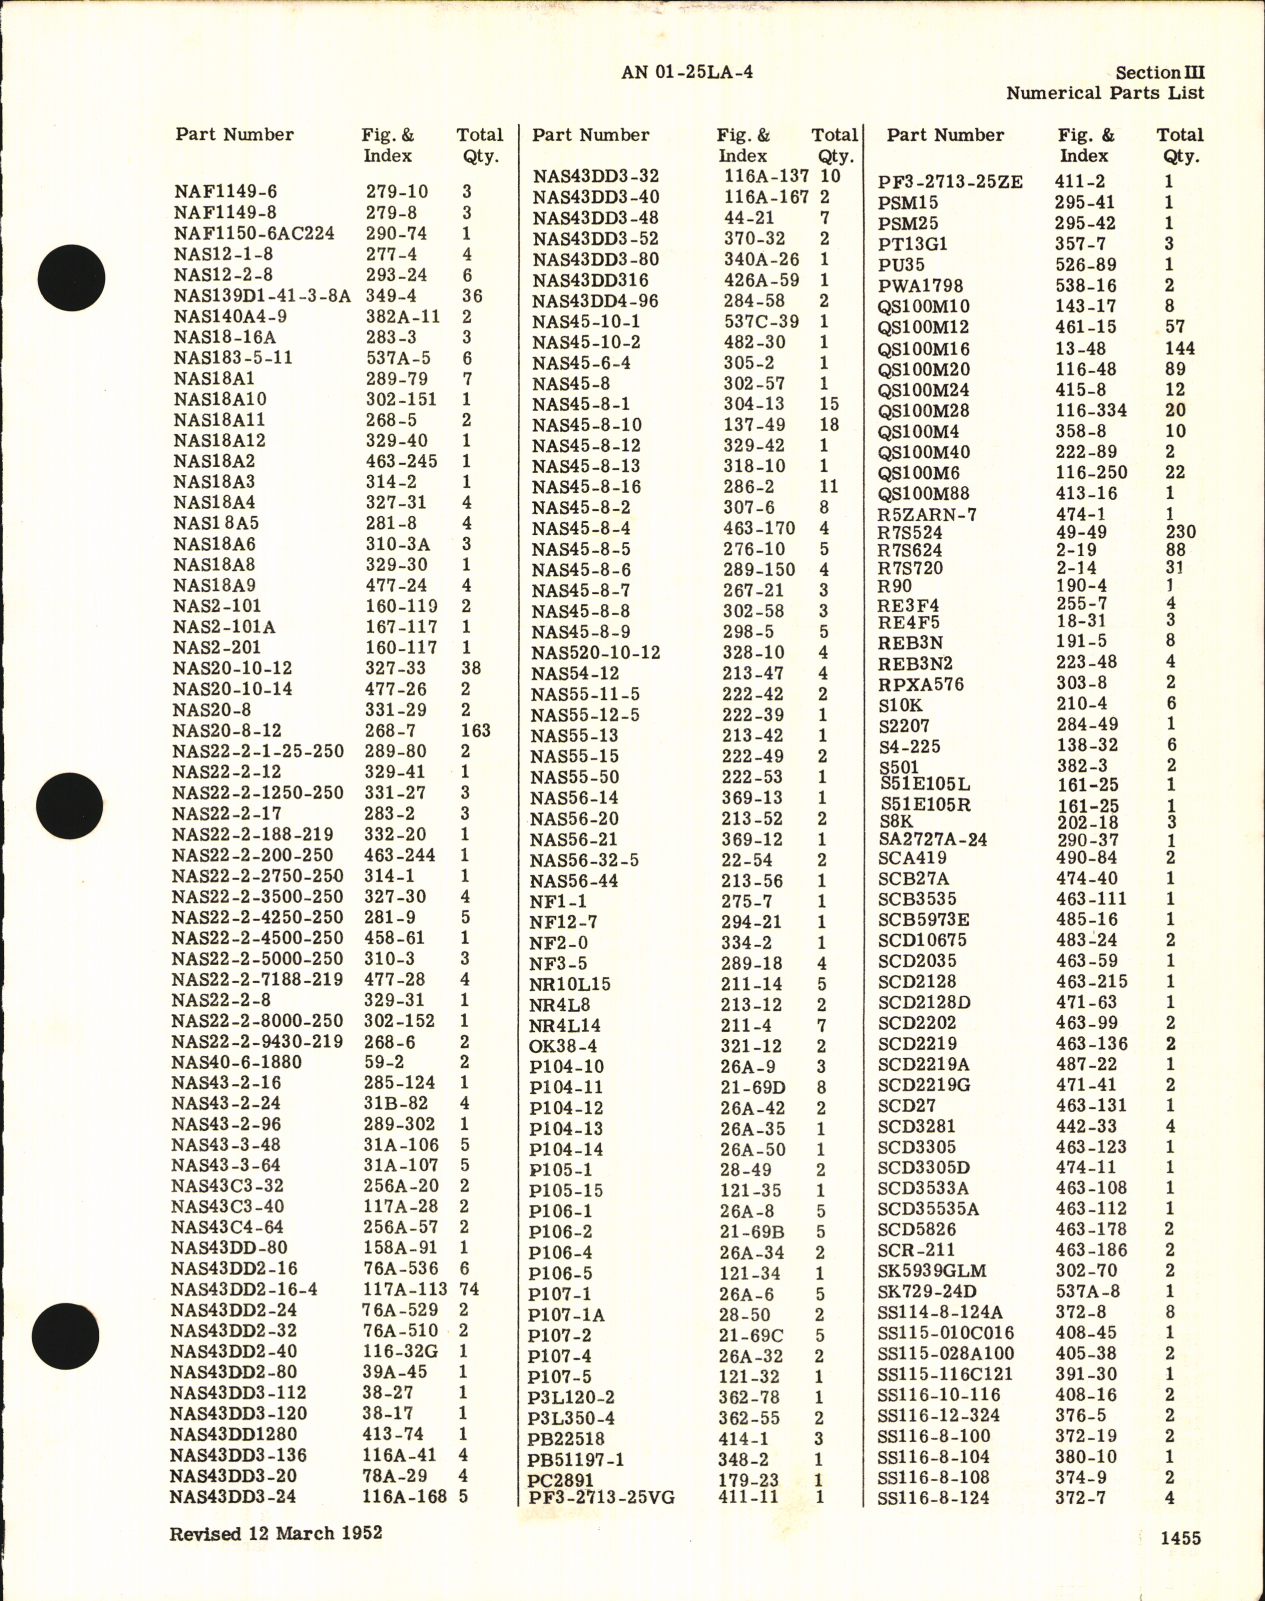 Sample page 5 from AirCorps Library document: Parts Catalog for C-46A, C-46D, and R5C-1